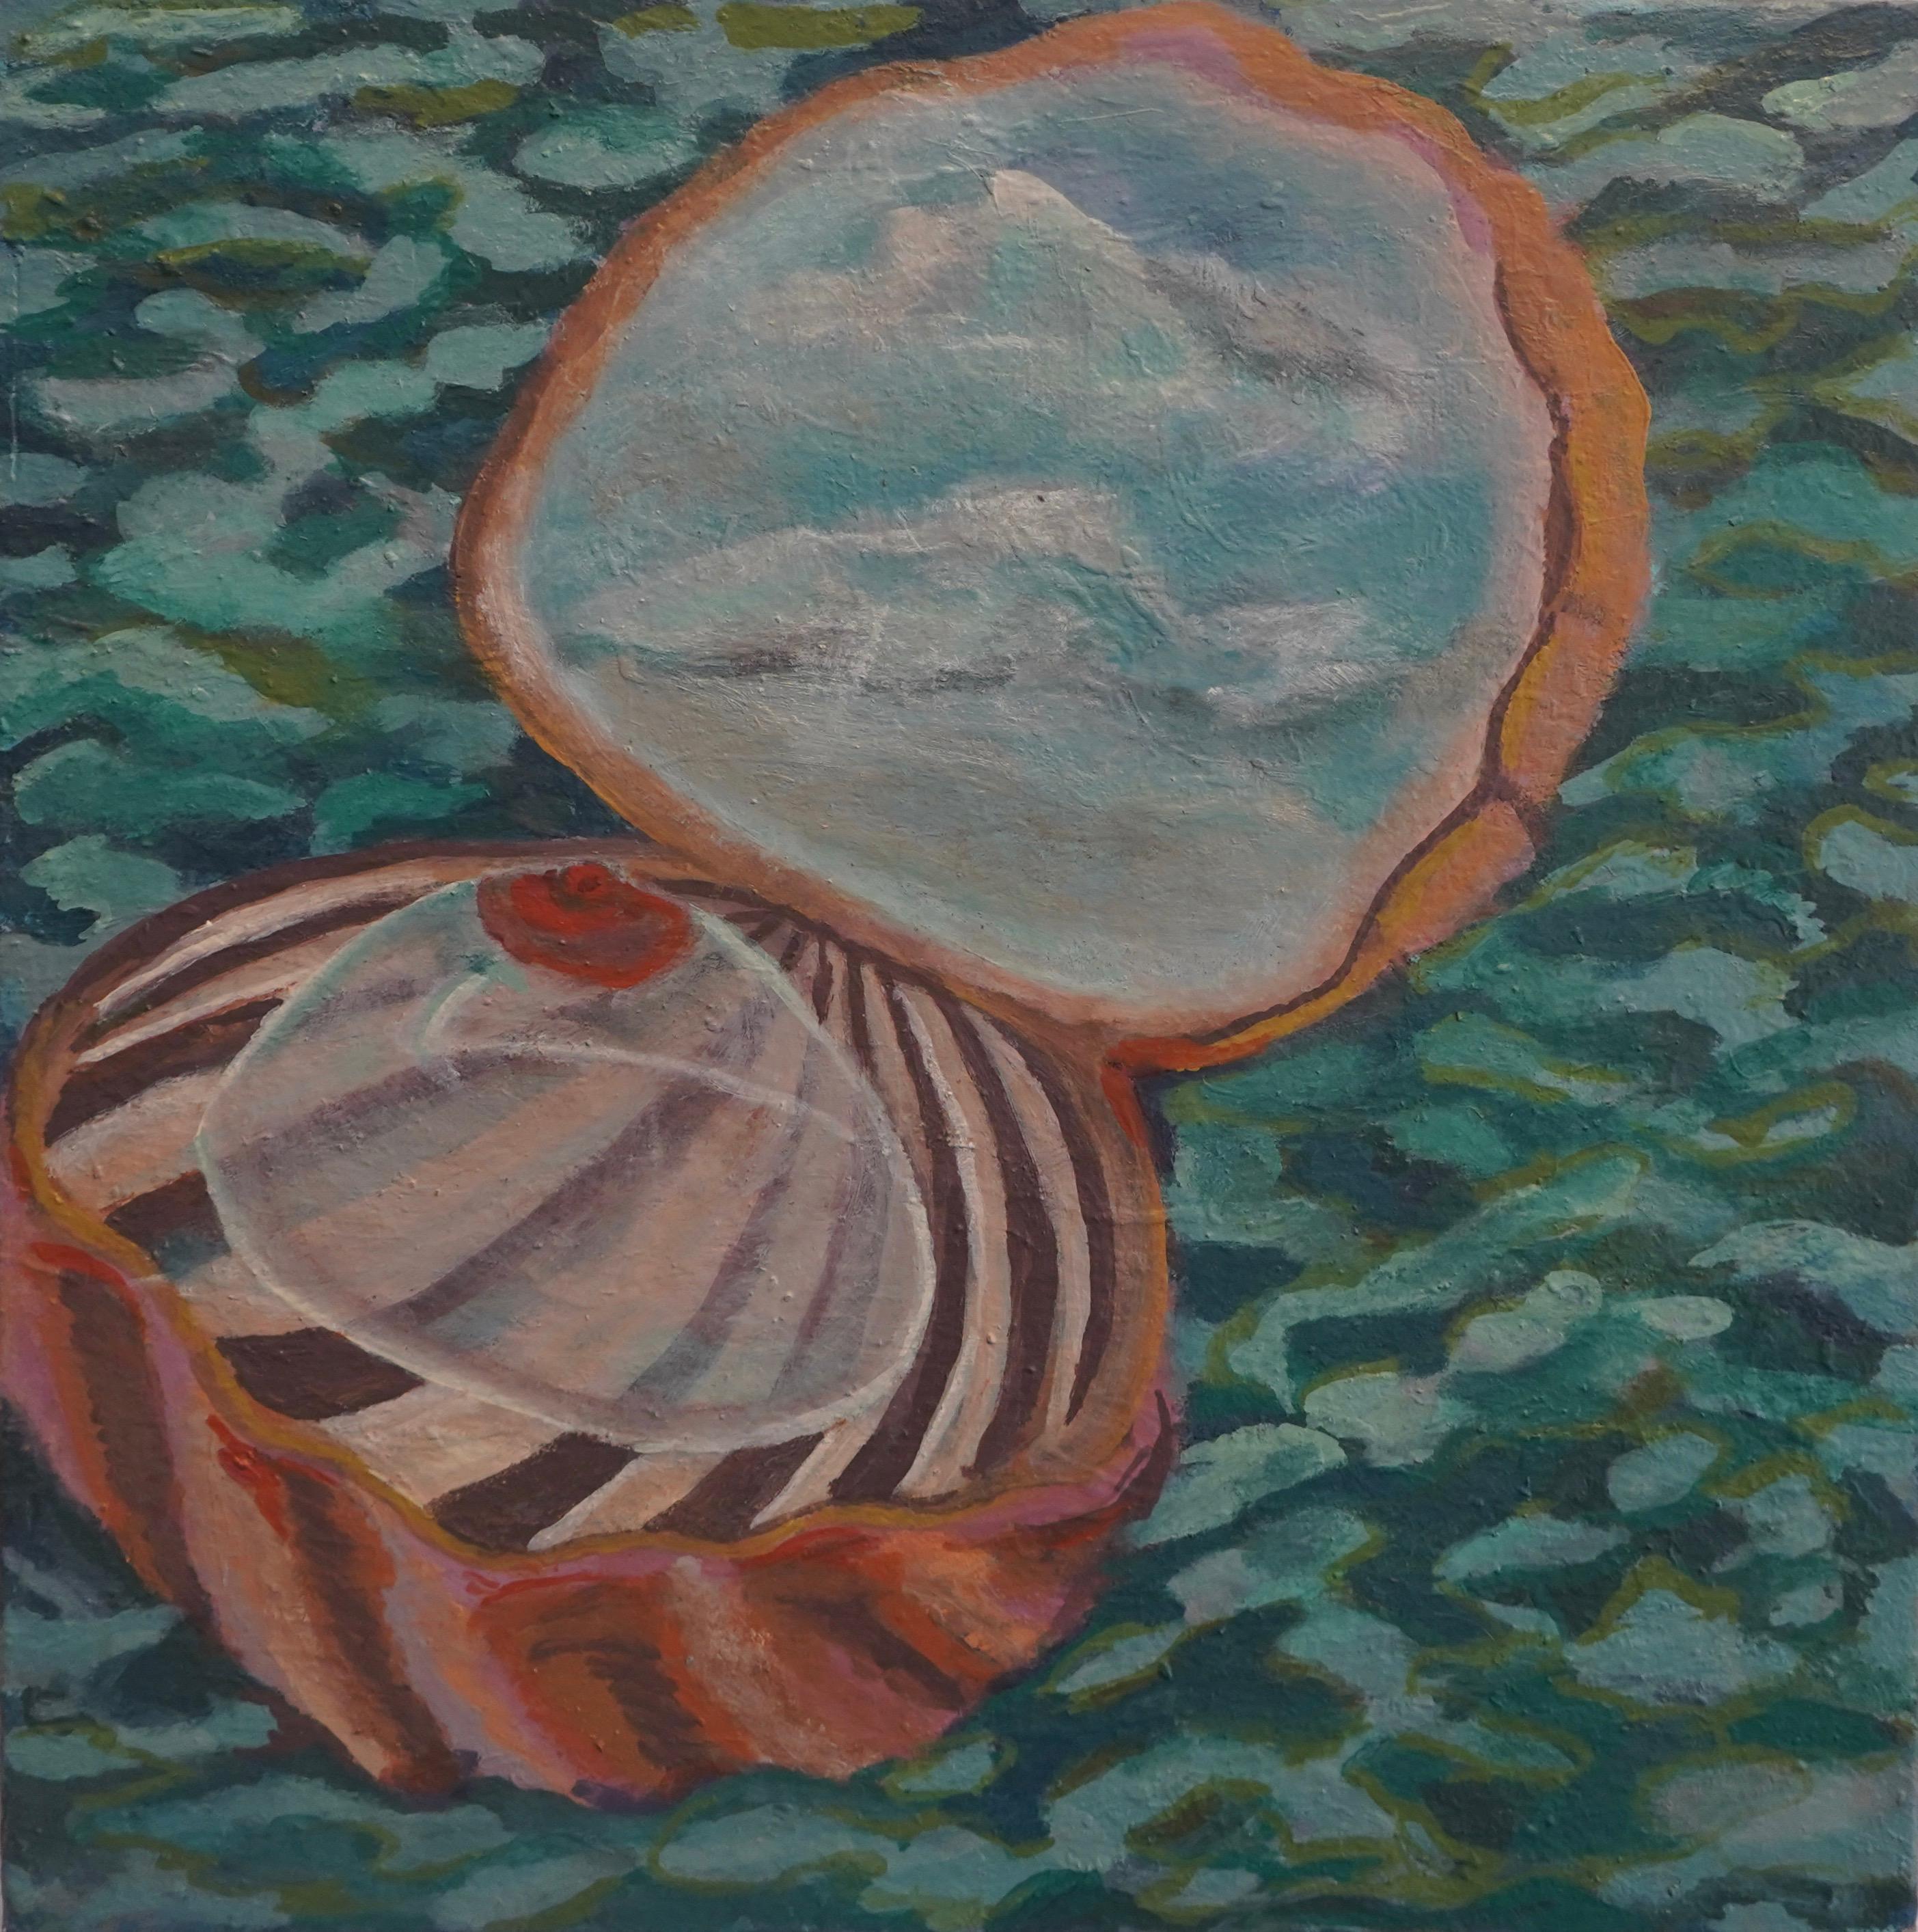 Sarah Rozell White Figurative Painting - Shell, Sea Life, Humor, Pop Culture, Surrealist, Small Oil Painting